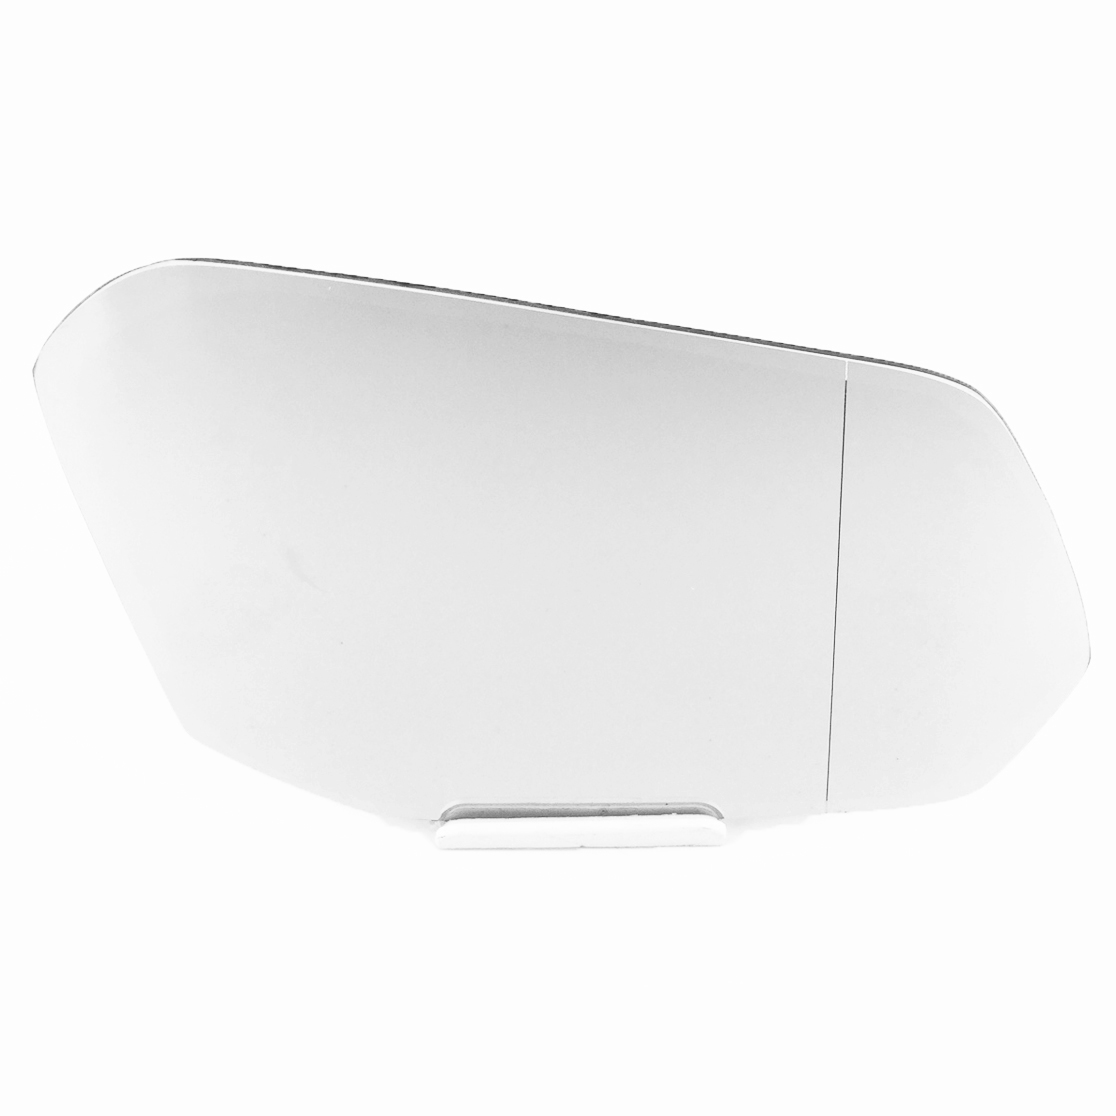 Mercedes Vito Wing Mirror Glass RIGHT HAND ( UK Driver Side ) 2016 to 2020 – Wide Angle Wing Mirror